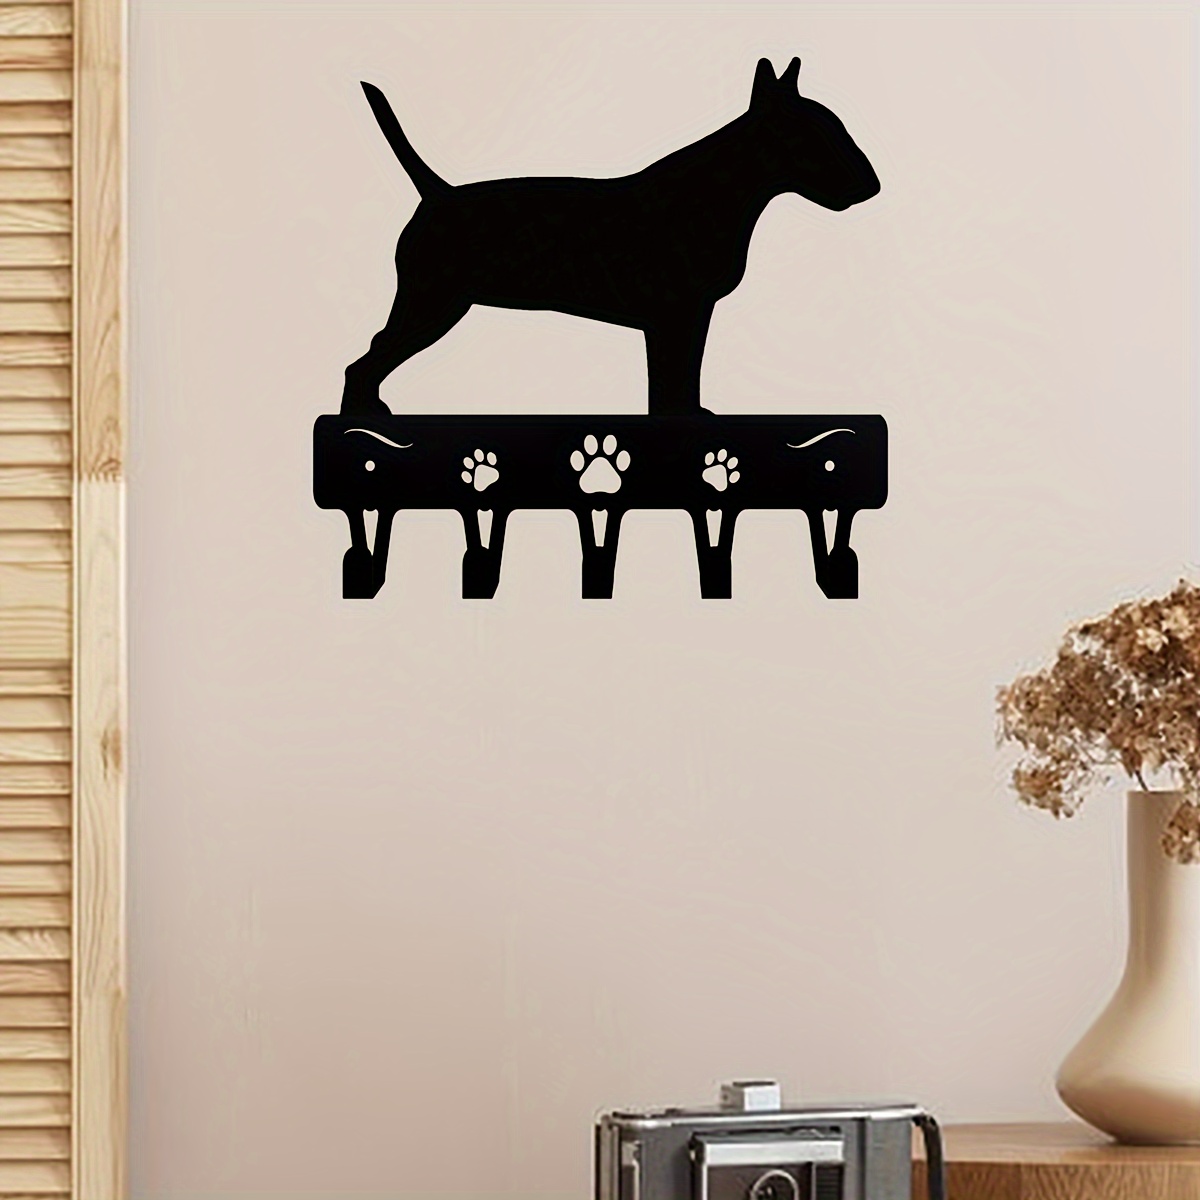 

Bull Terrier Metal Key Holder & Leash Hanger With 5 Hooks - Rustic Style Universal Holiday Wall-mounted Coat Rack